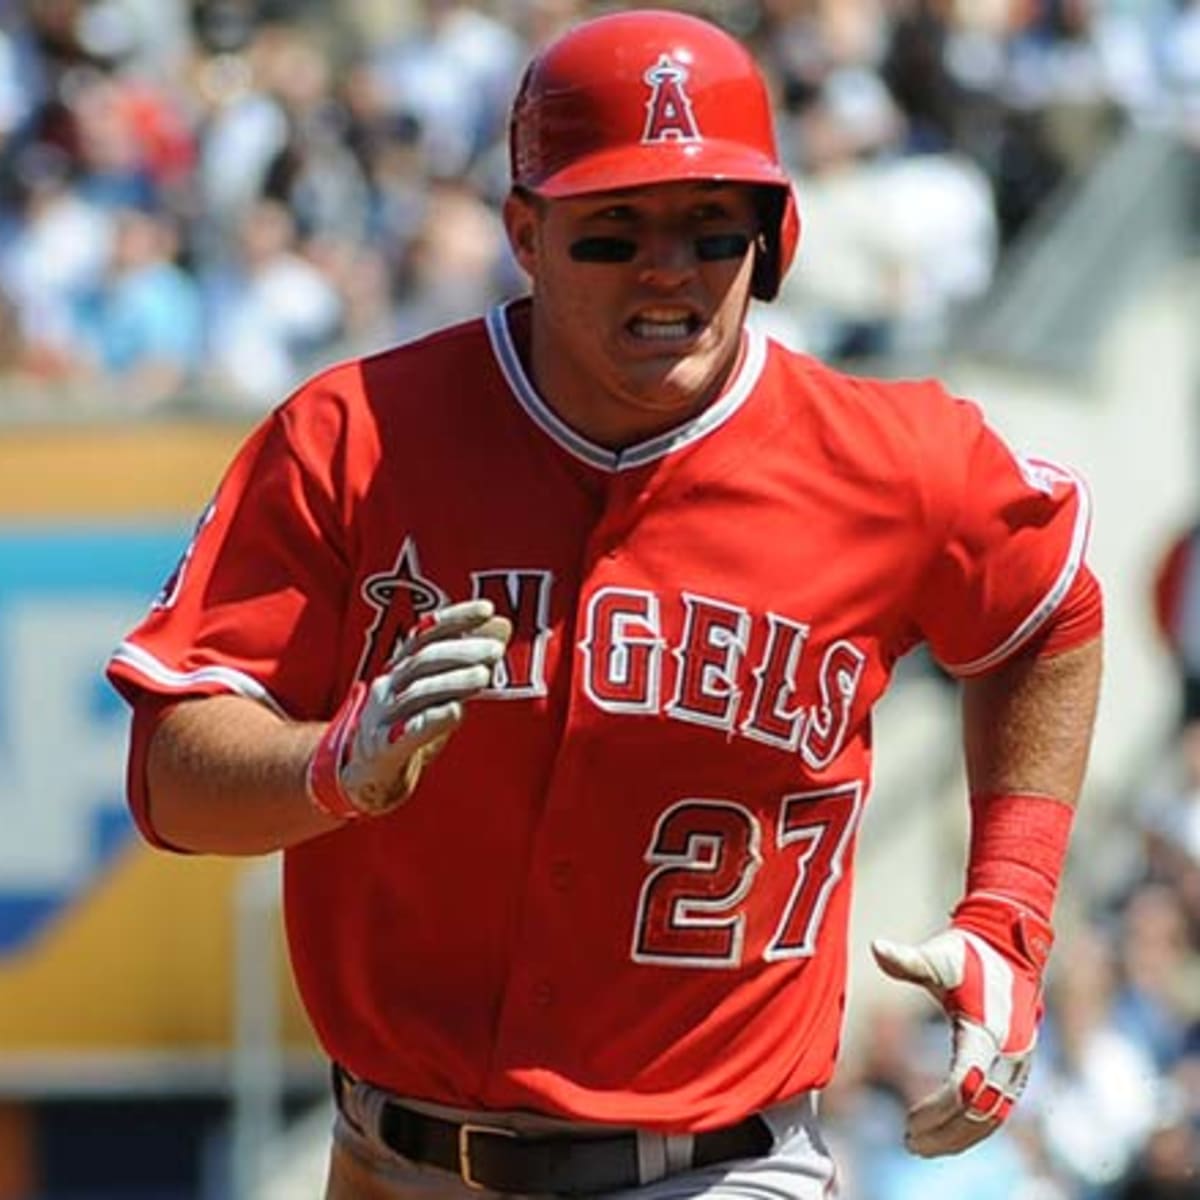 Expert says Angels star Mike Trout's back condition is not  career-threatening – Orange County Register